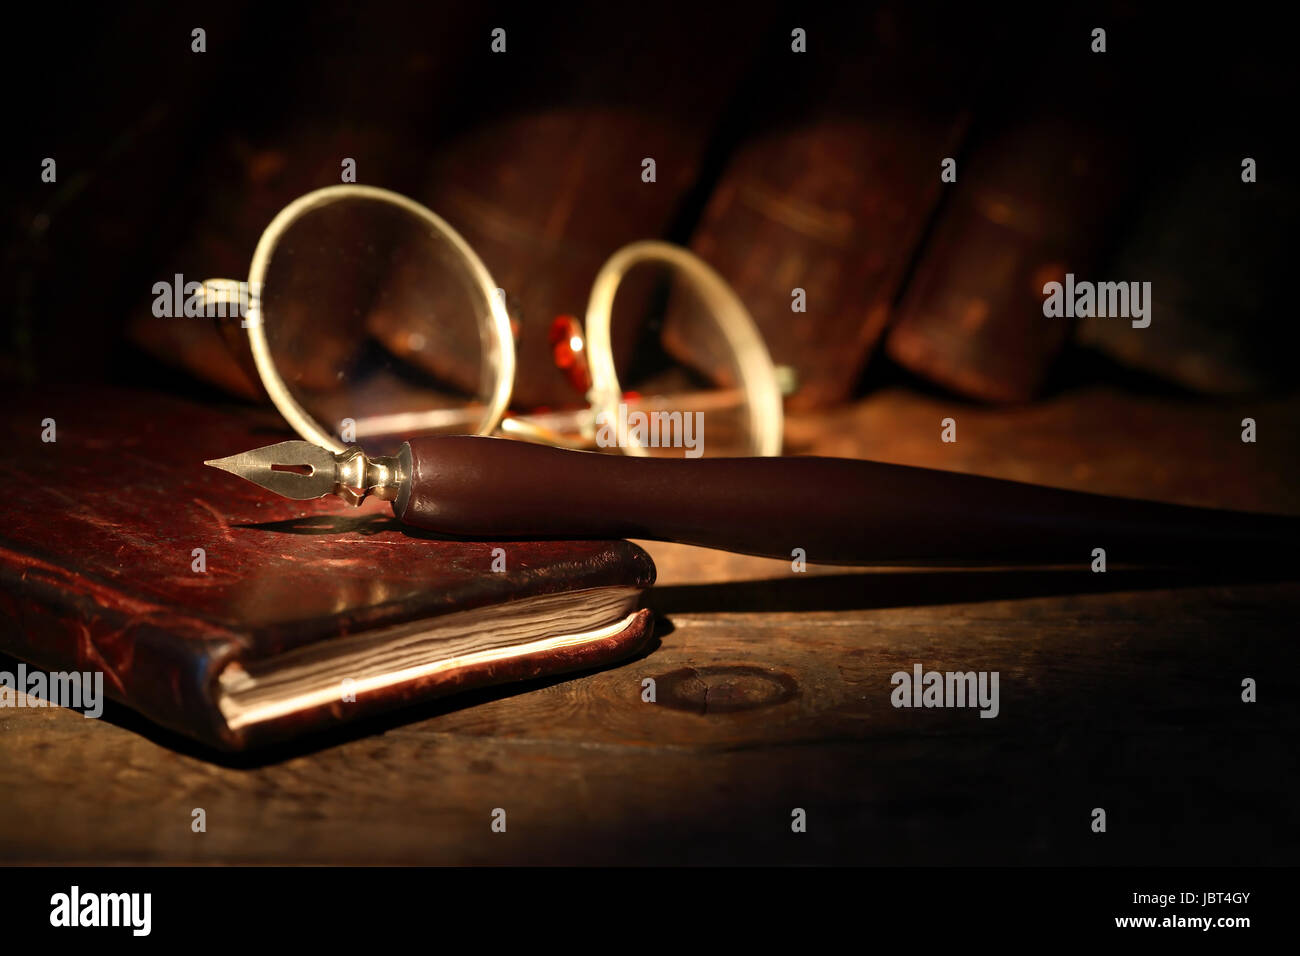 Vintage wooden pen on leather notebook near spectacles on background with old books Stock Photo